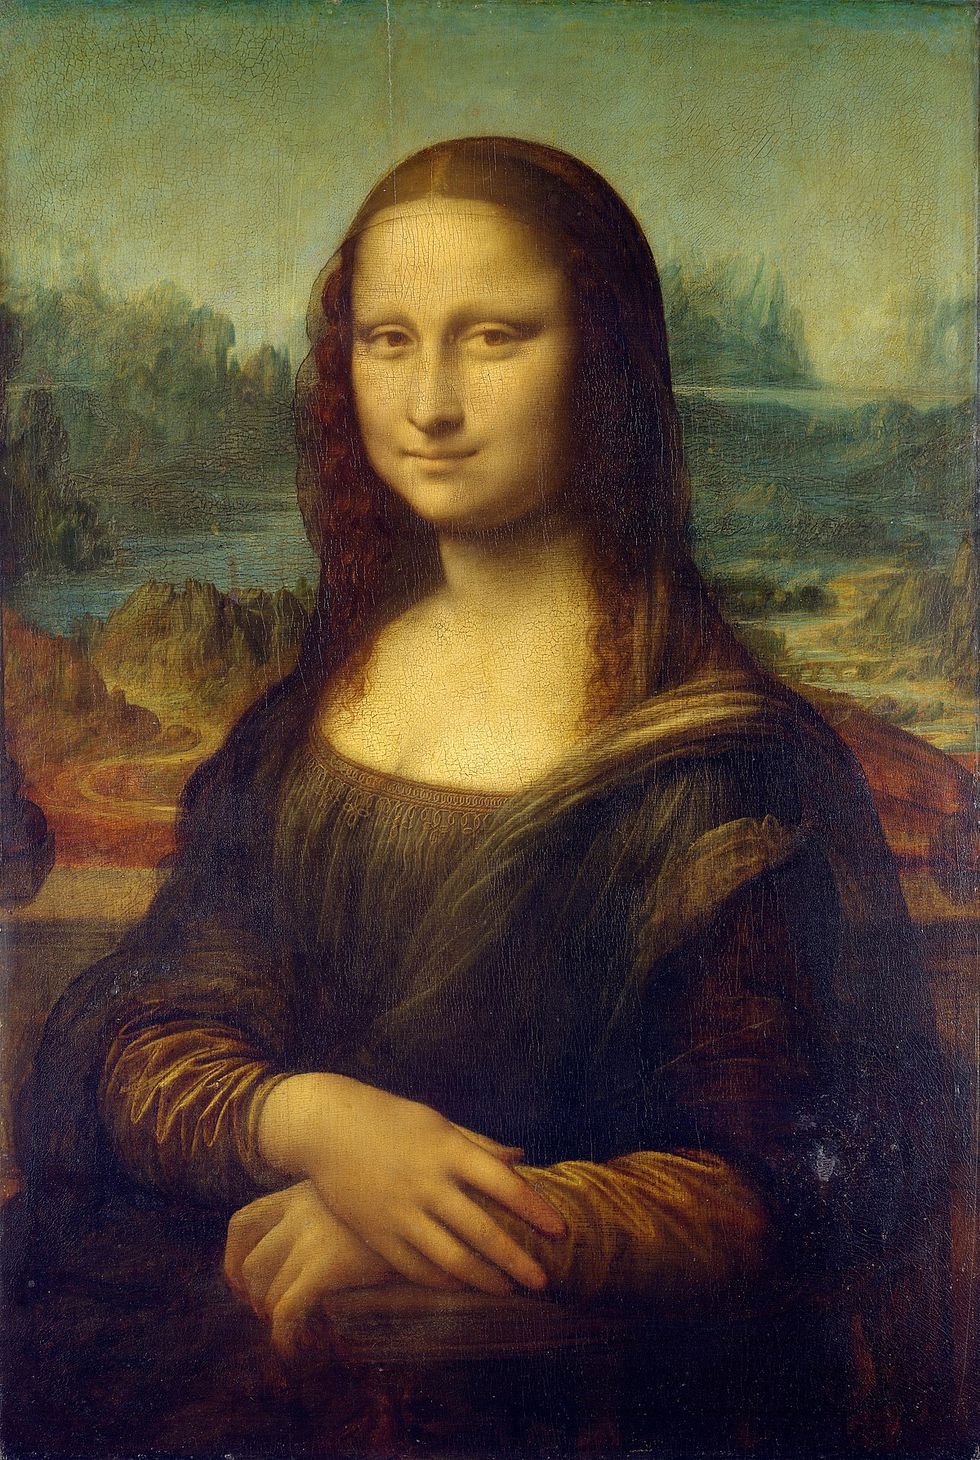 What's So Special About the Mona Lisa?